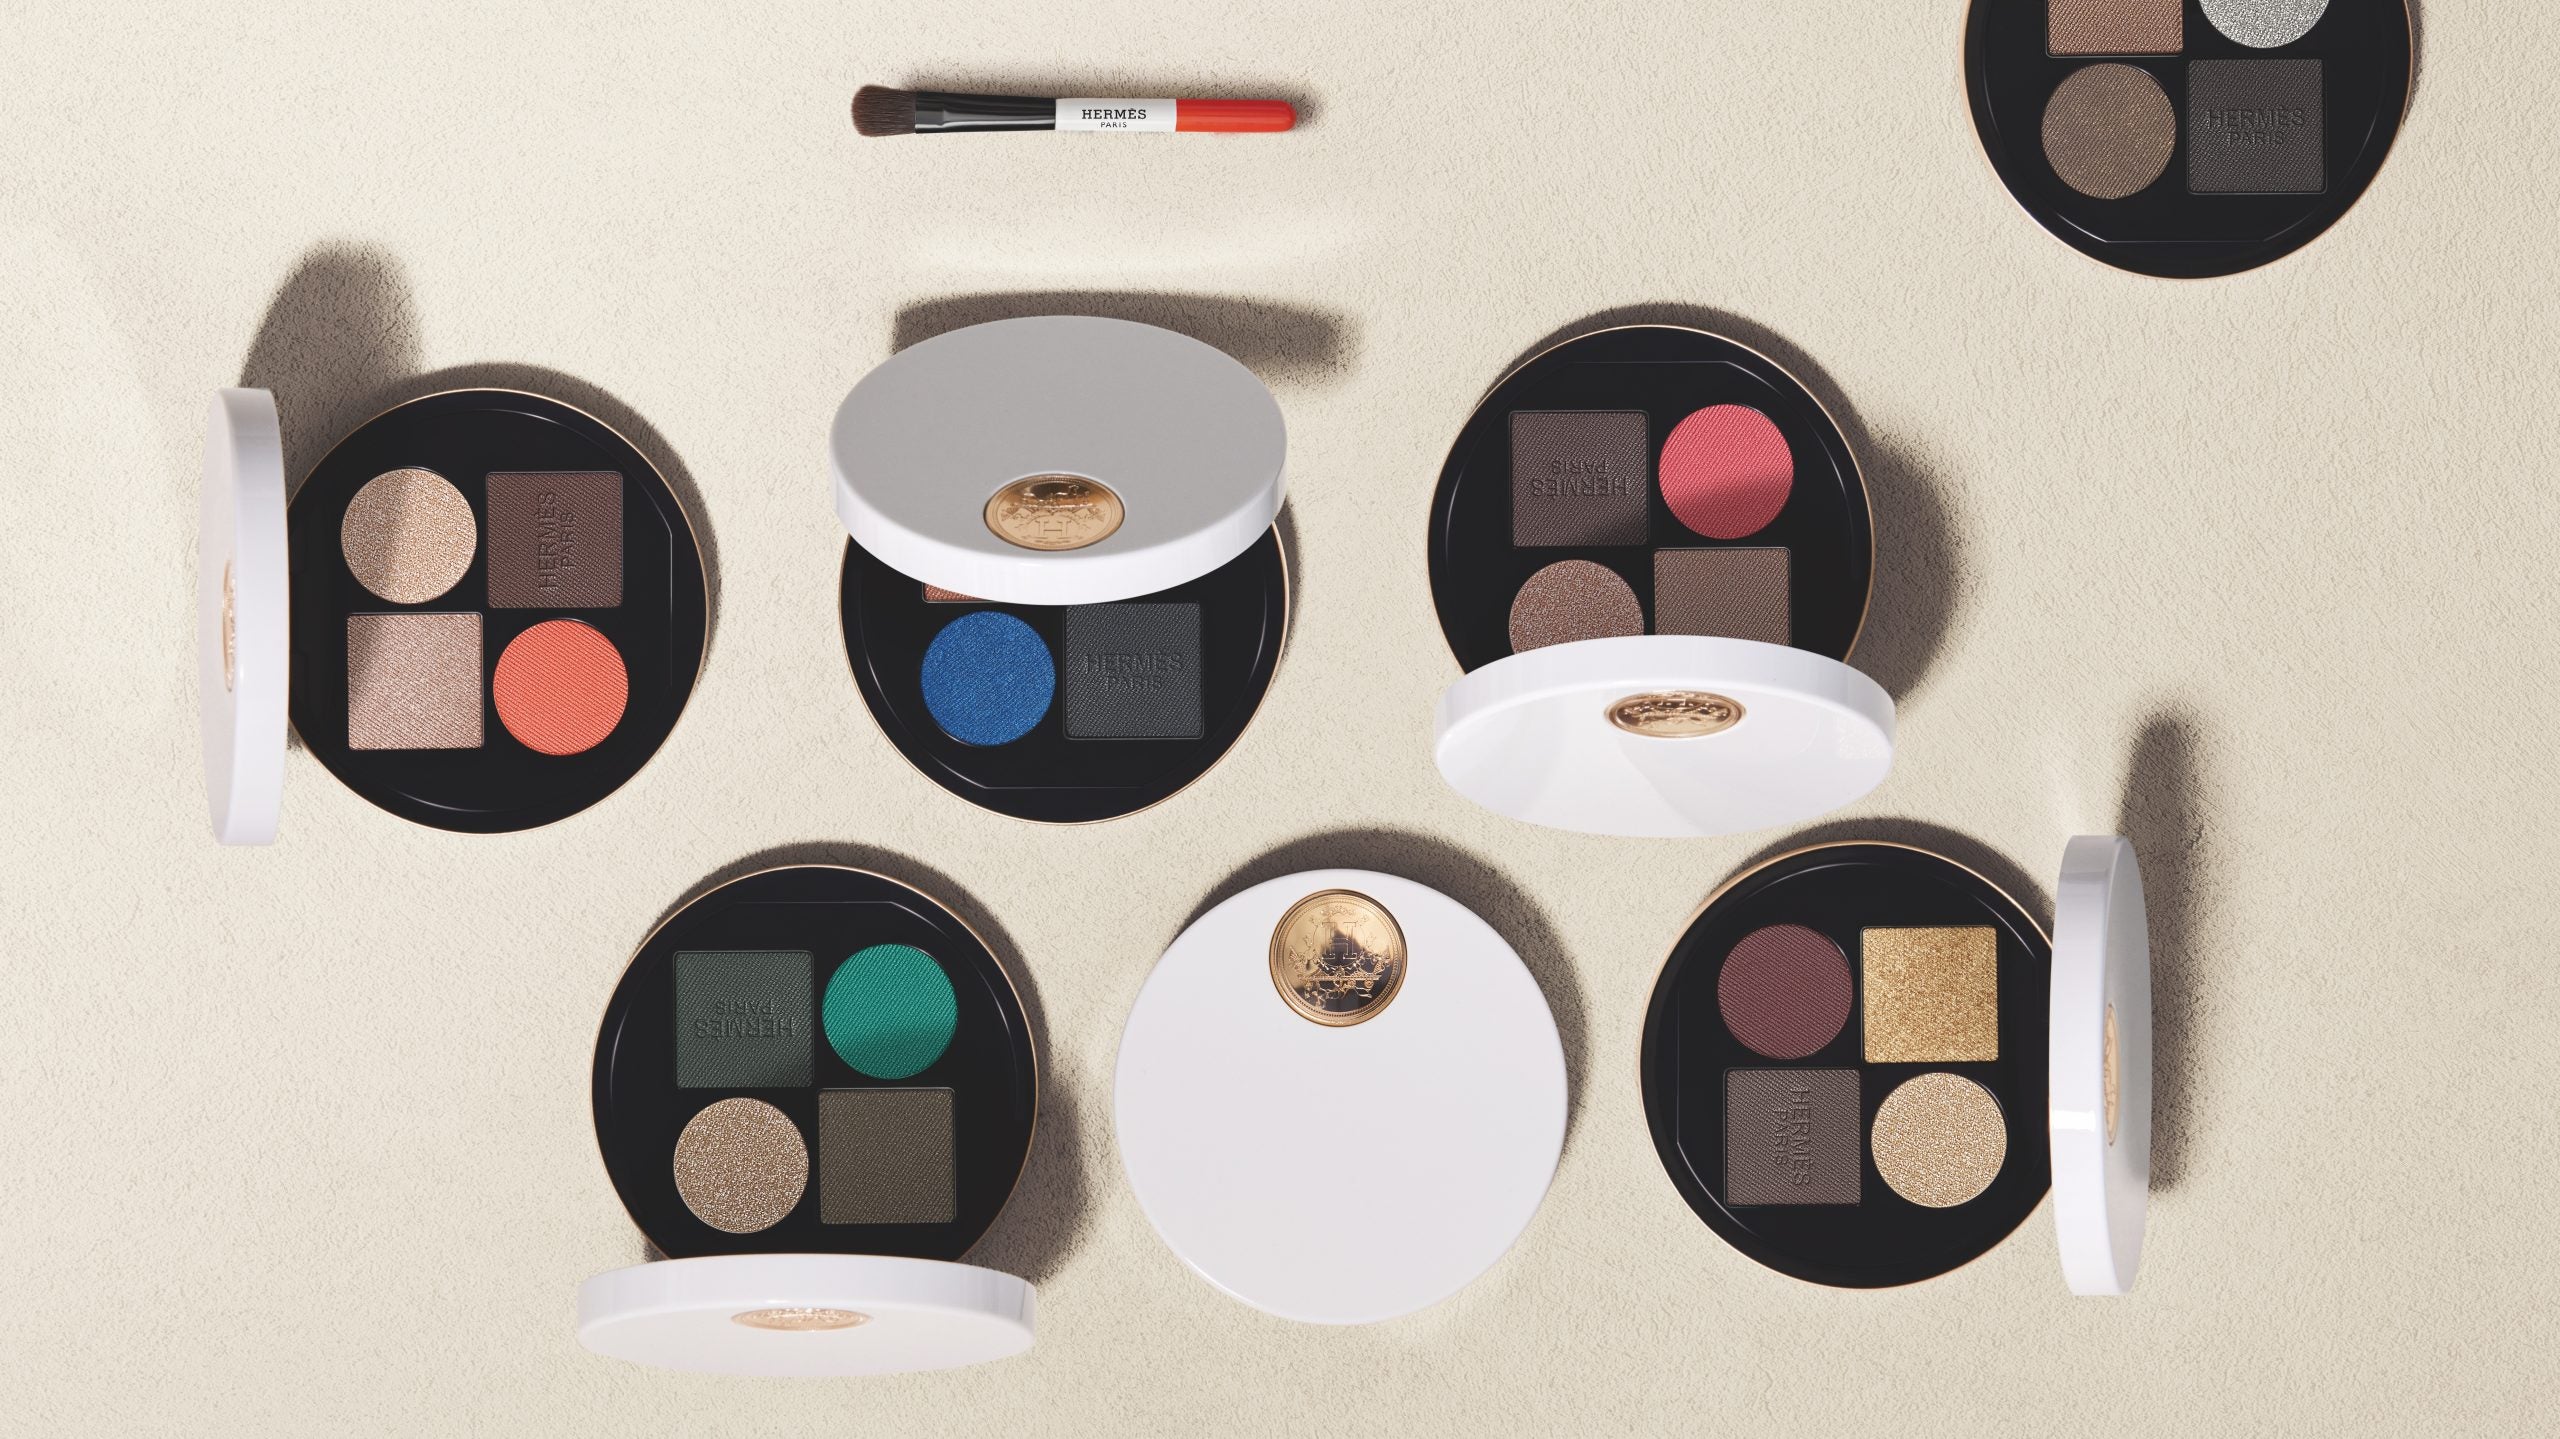 Let Hermès’ New Eye Collection Be Your Fall Go-To